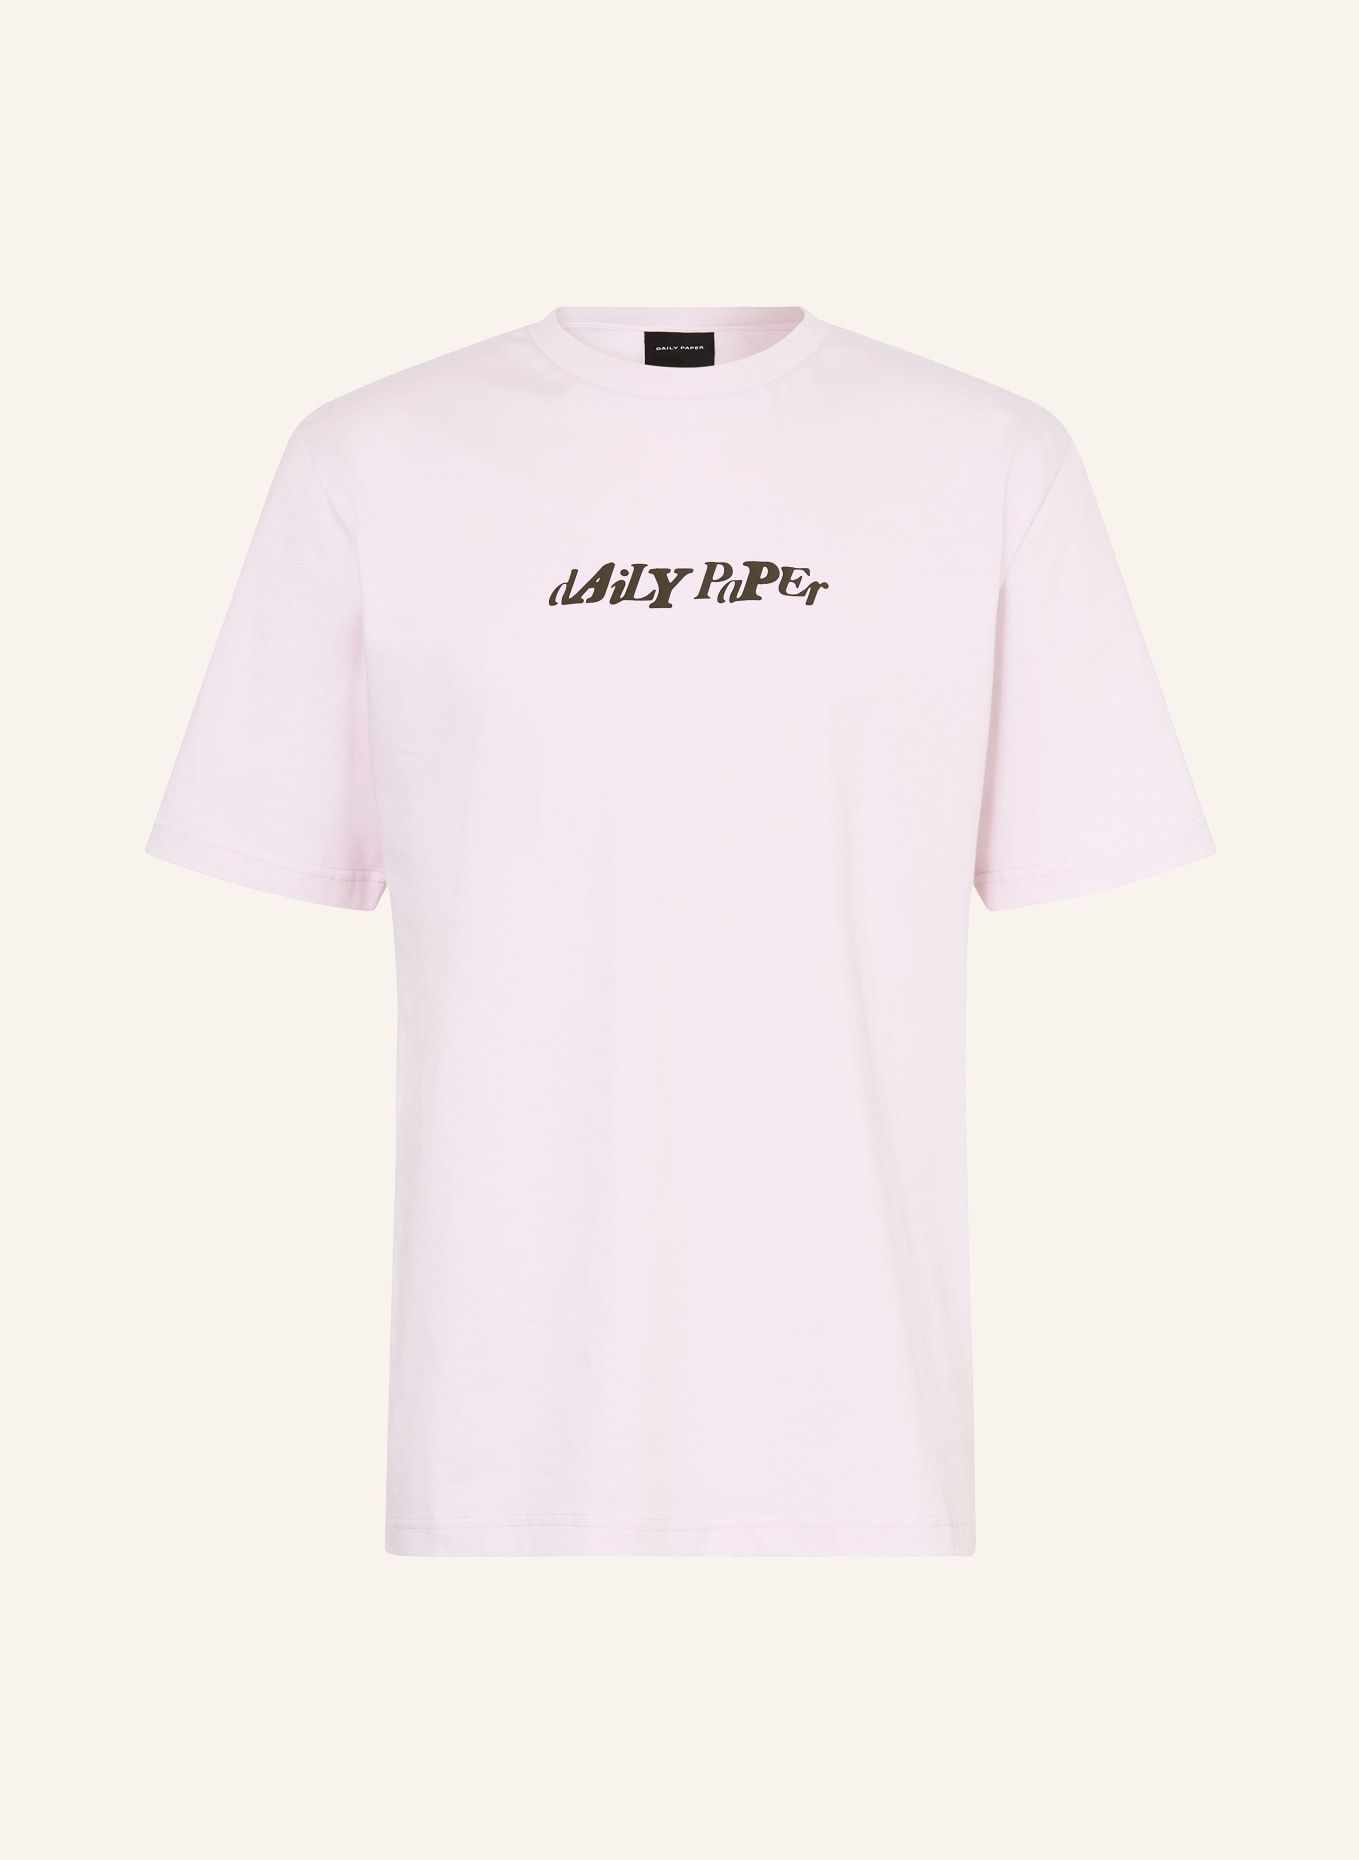 DAILY PAPER T-shirt, Color: LIGHT PINK (Image 1)